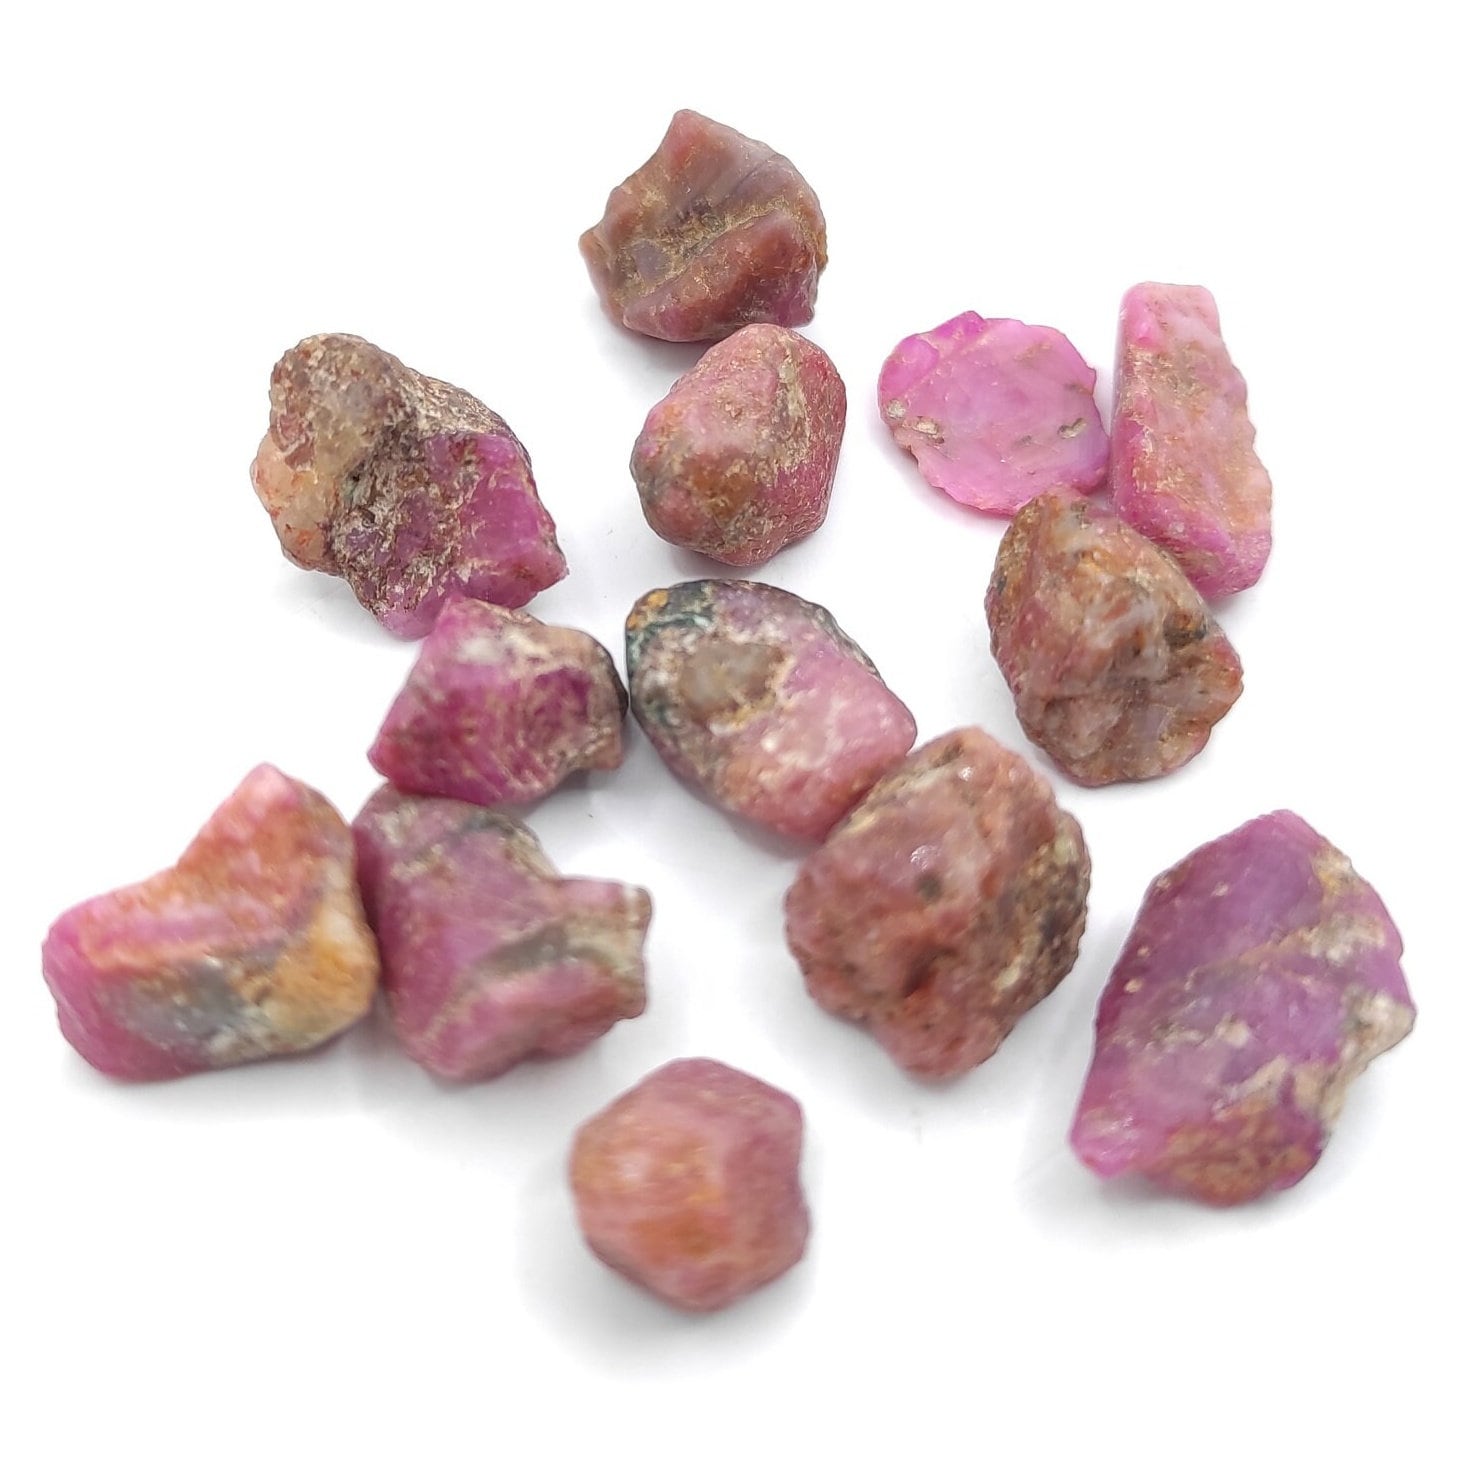 57ct Untreated Ruby Lot - Unheated Ruby Gemstones - Raw Red Ruby from Mozambique - Rough Rubies Gems - Loose Ruby Gemstones - Rough Gems